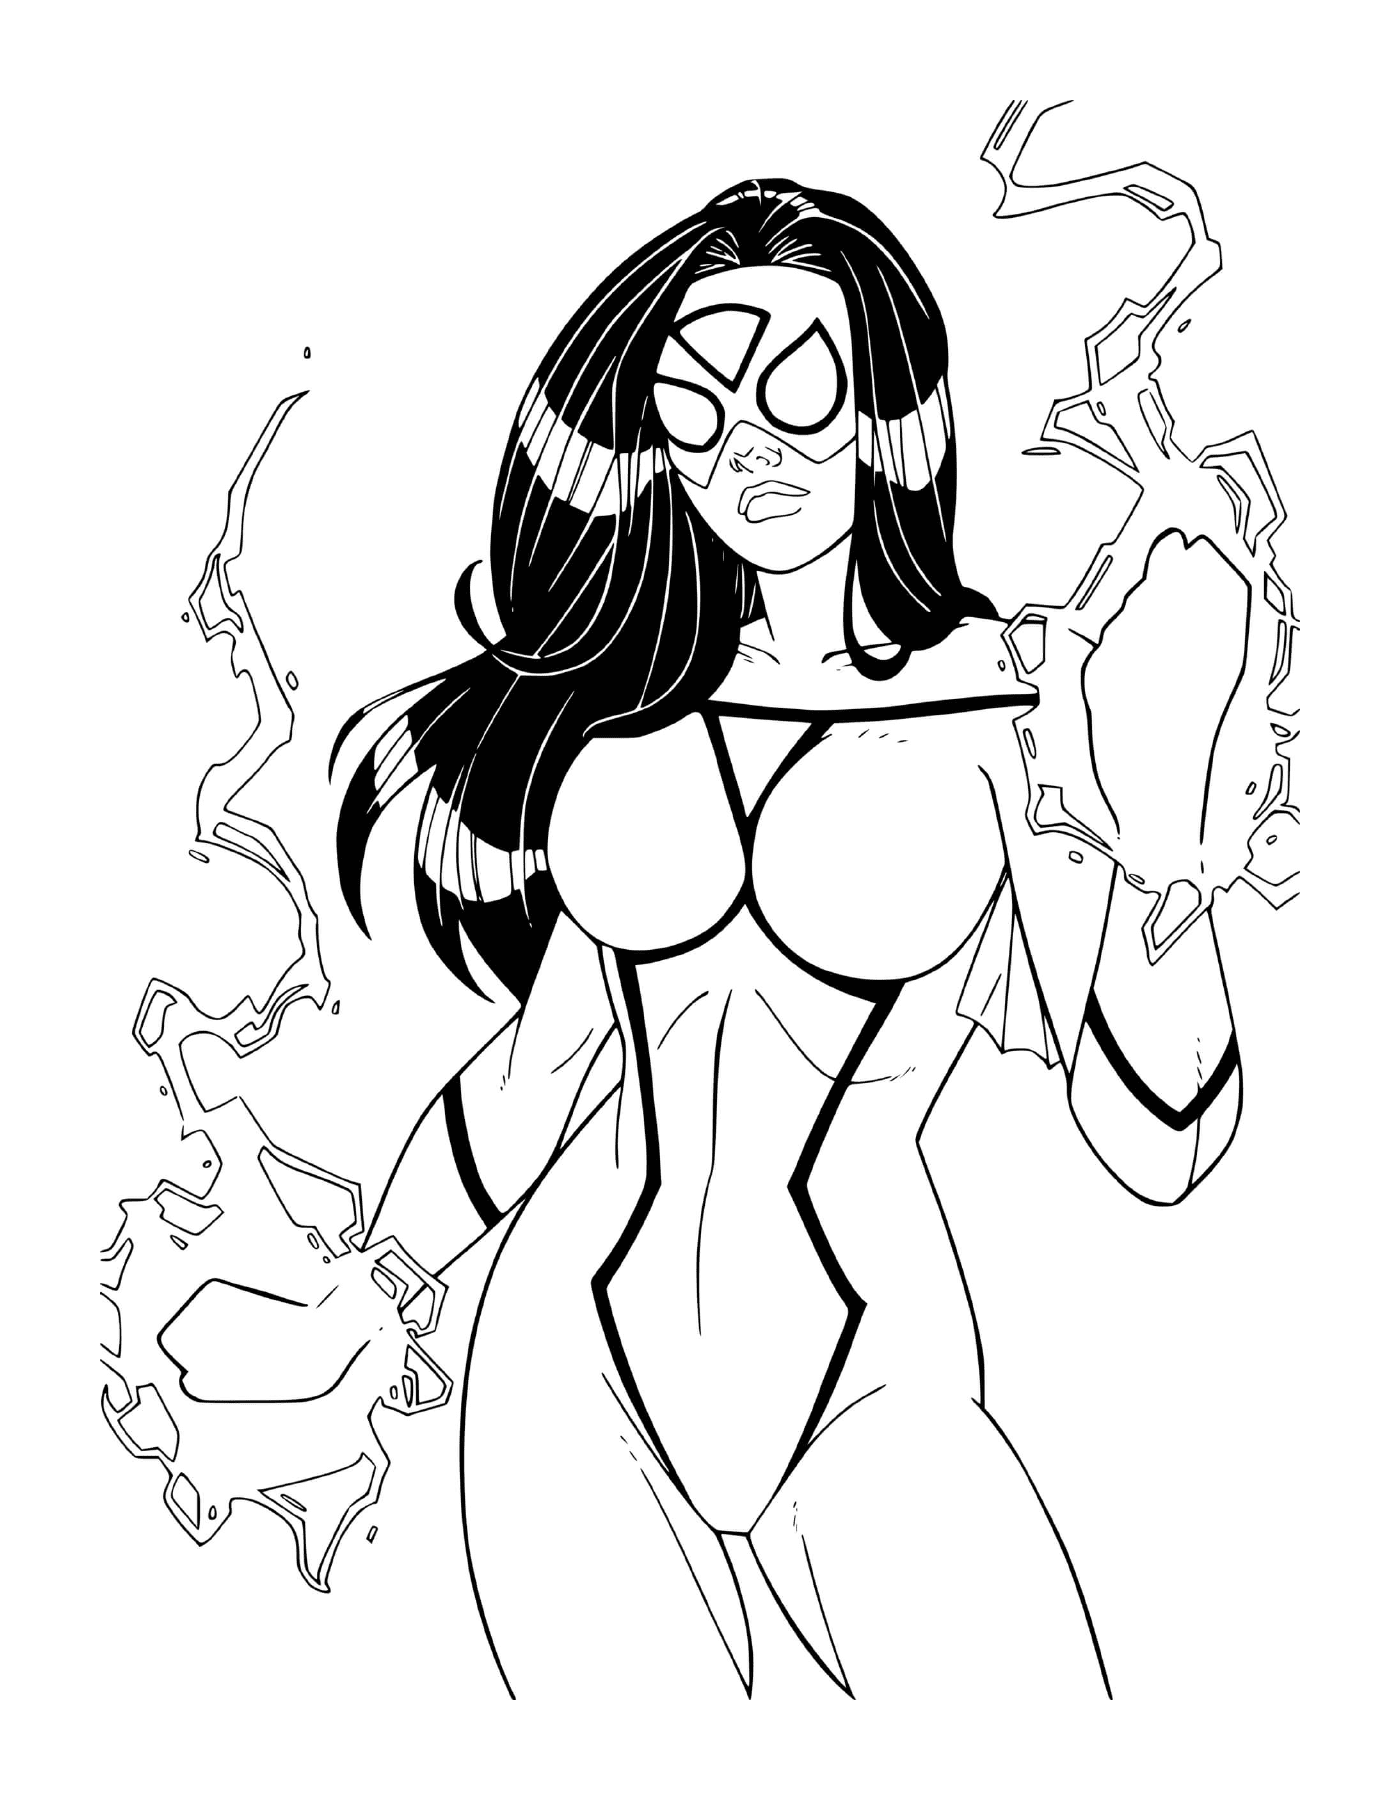  Super heroin Spider Woman by Windriderx23 